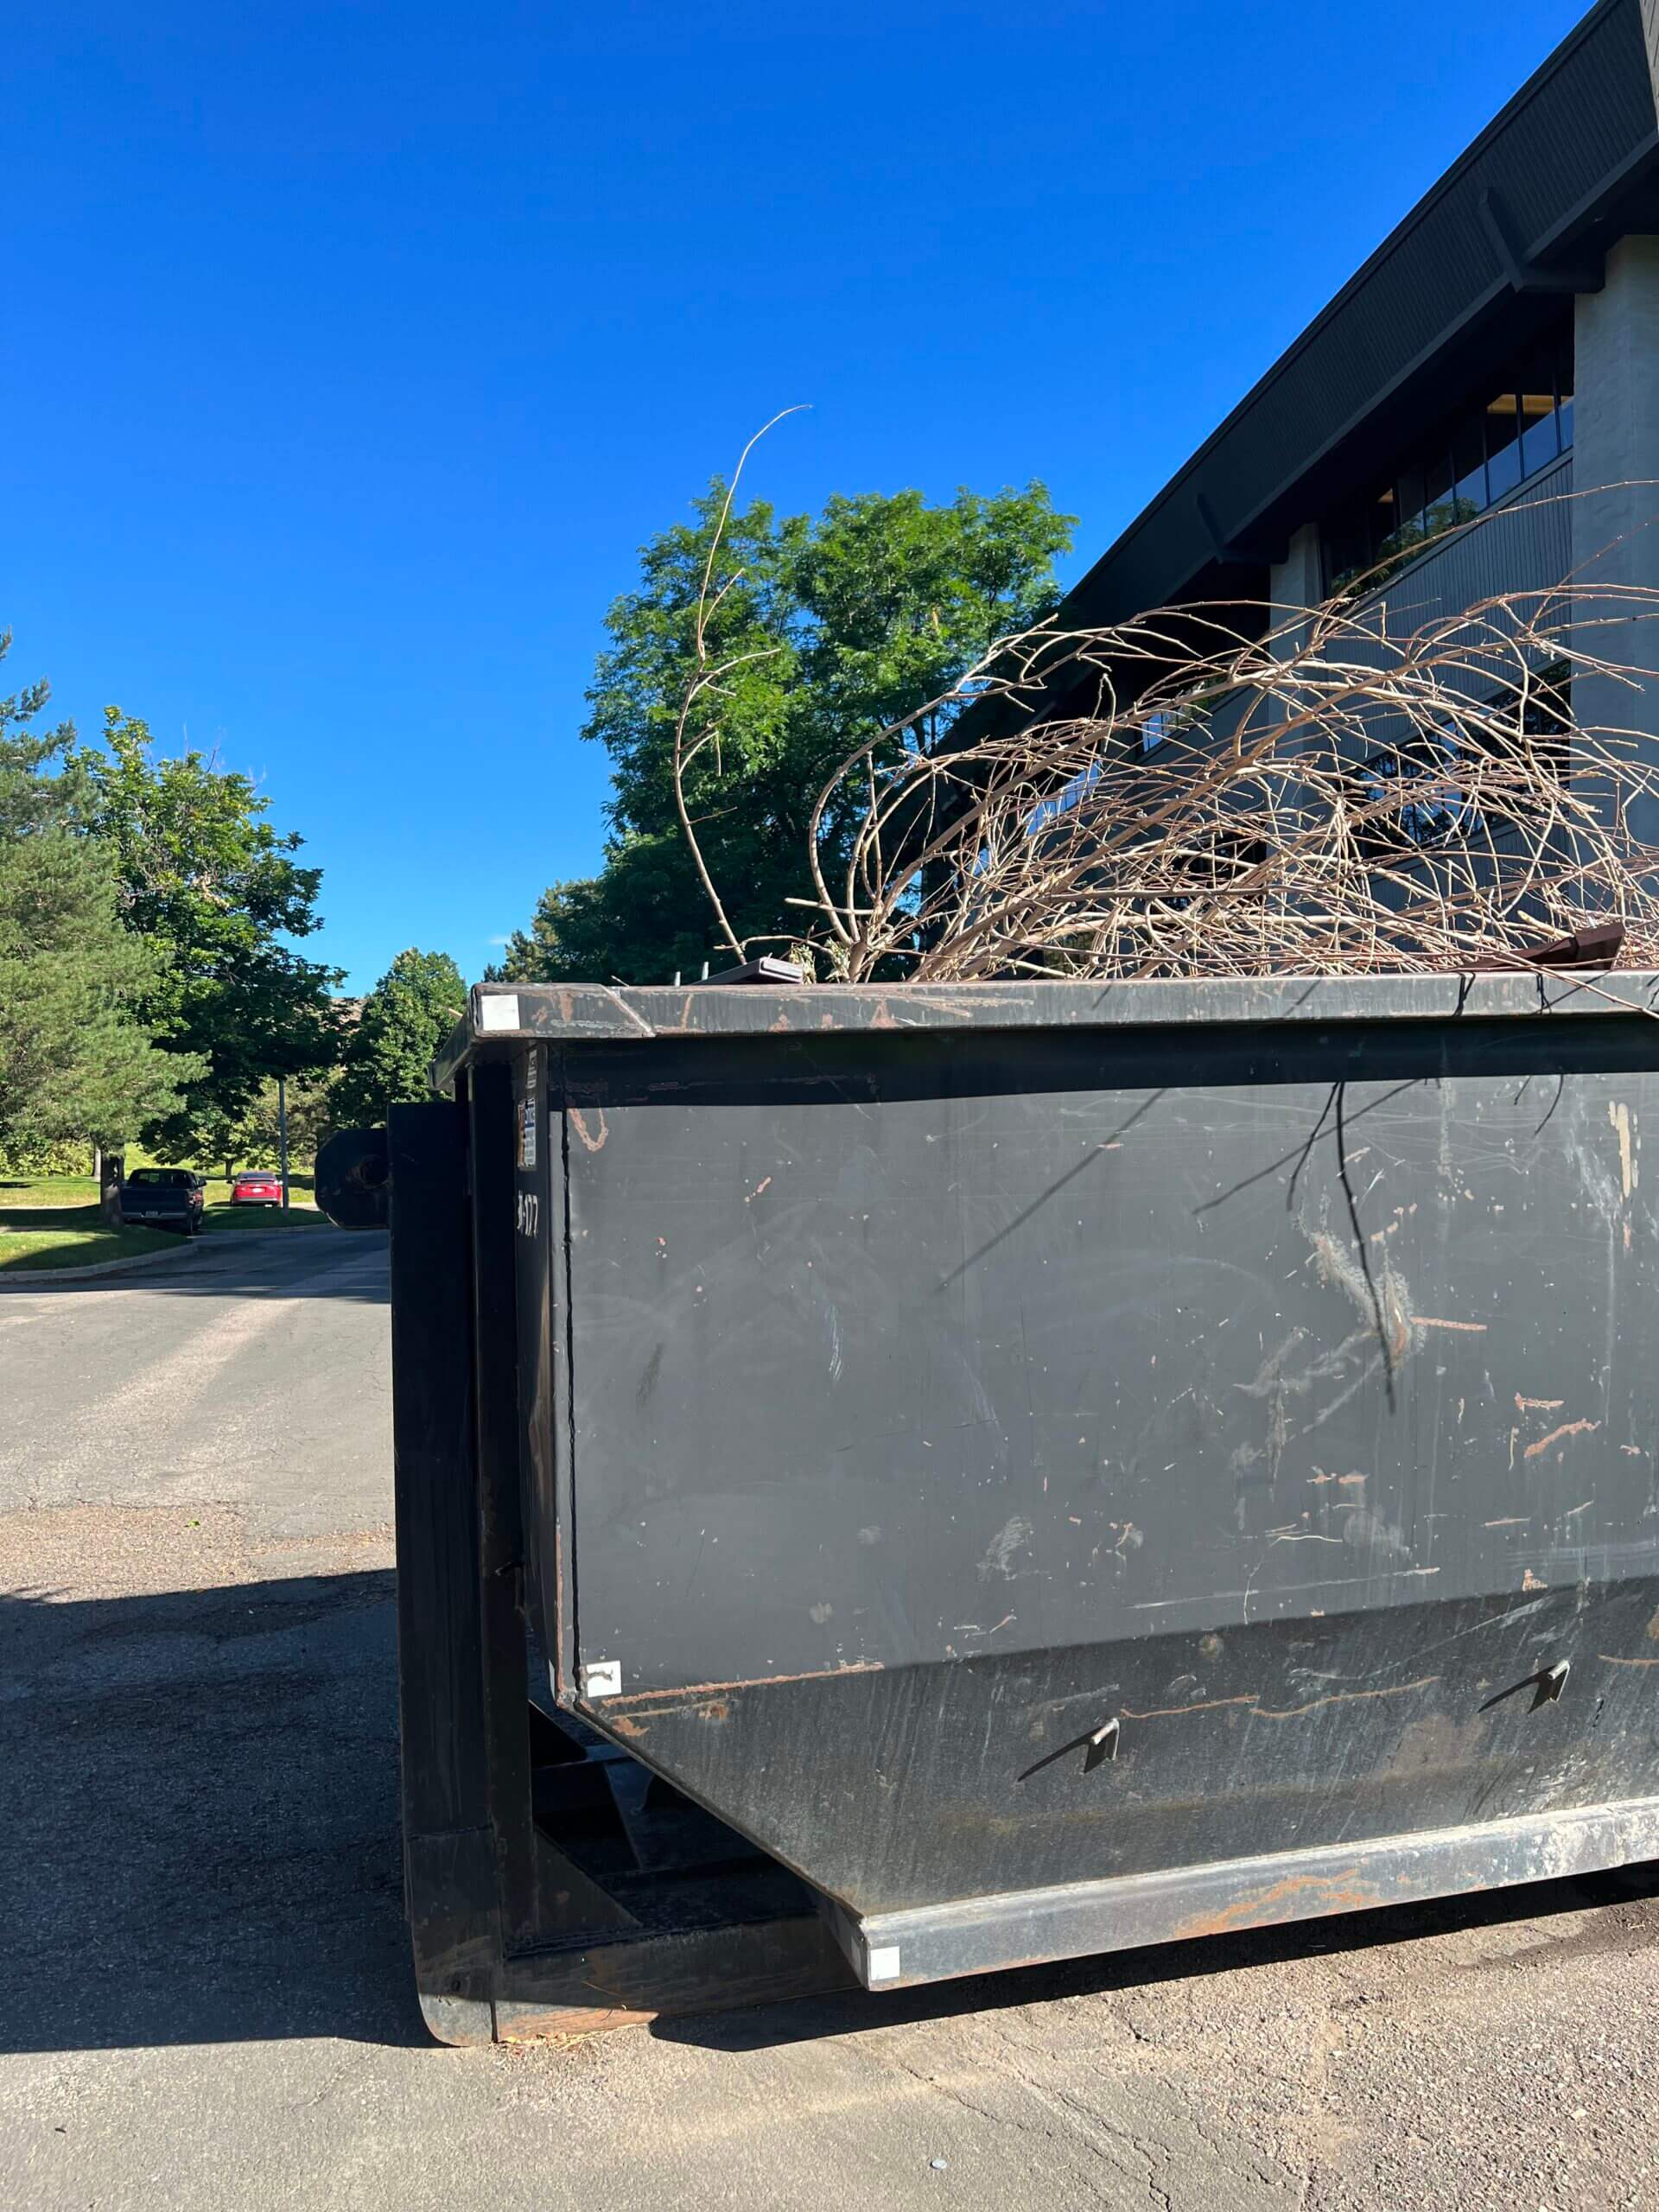 Photo of a dumpster rental in Durham, NC, filled with shrubs